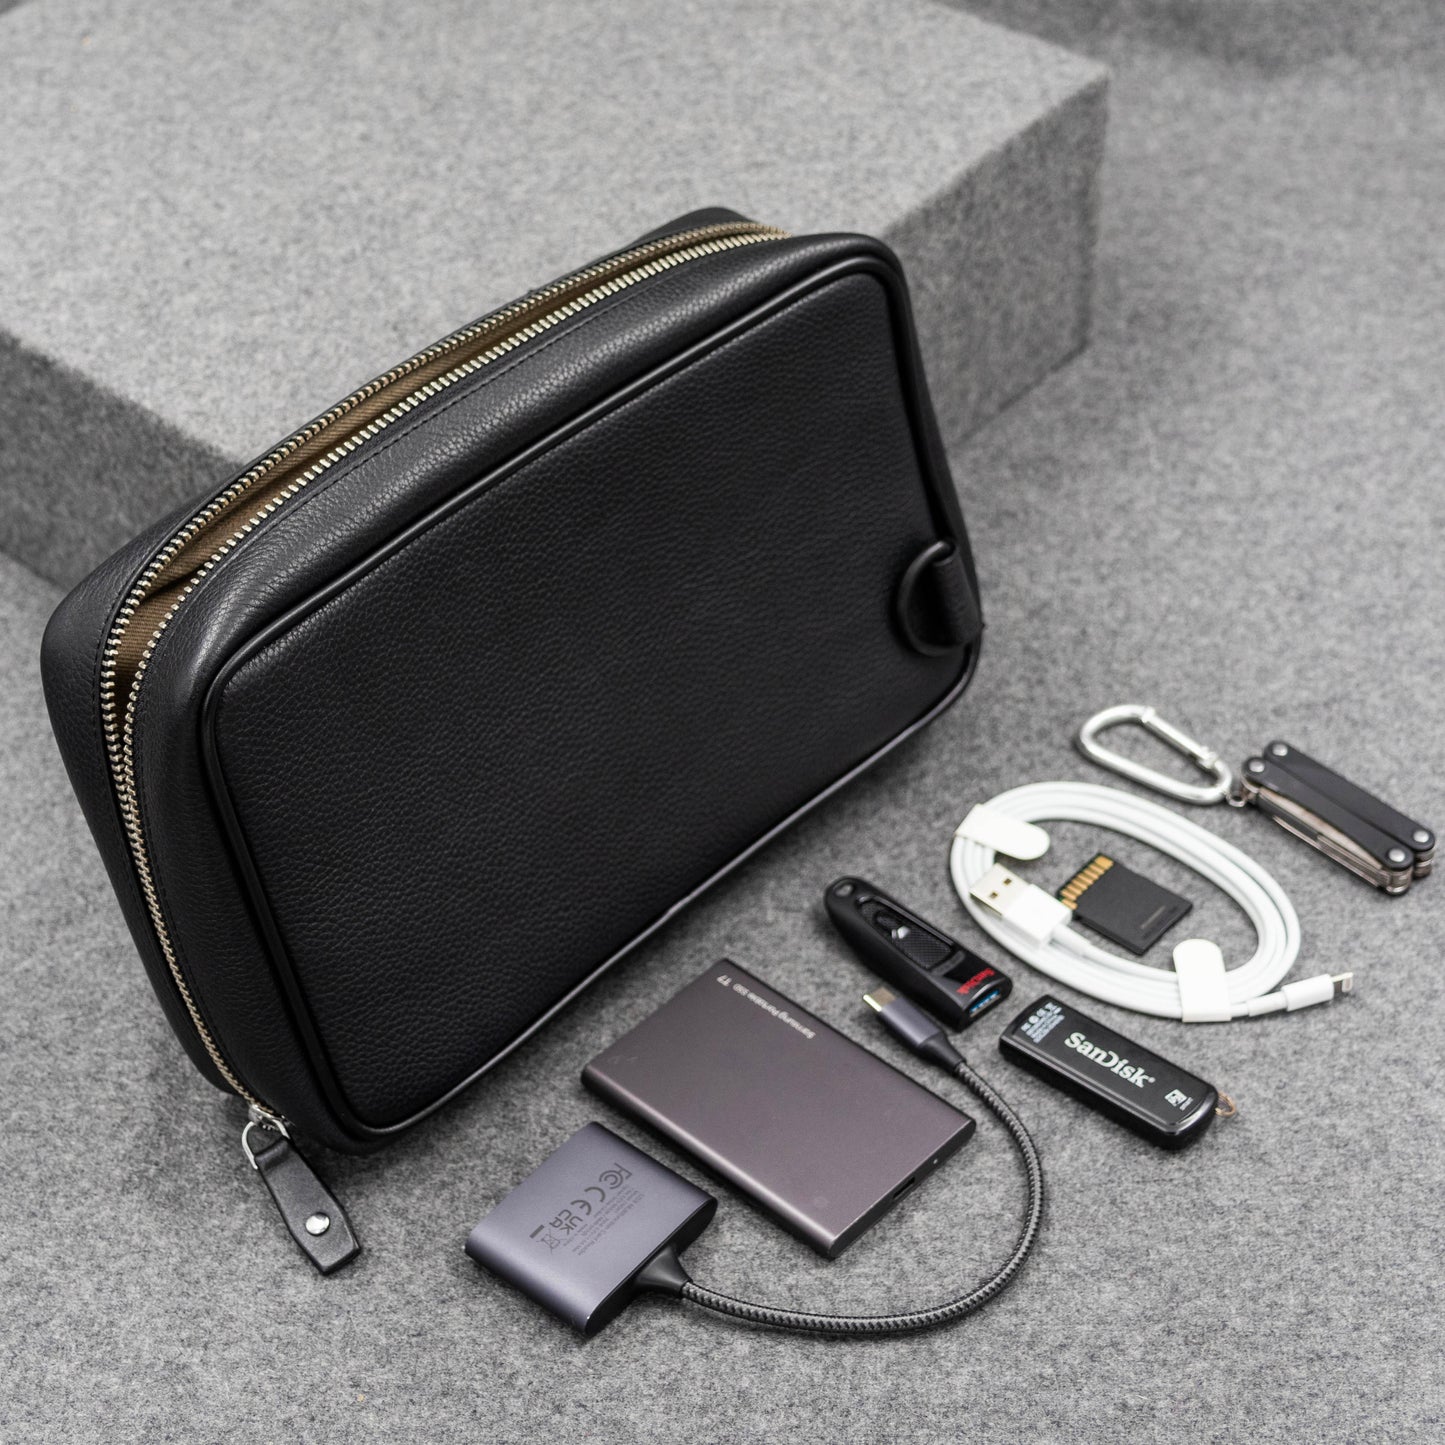 Tech pouch for cords, cables, electronics organization in leather